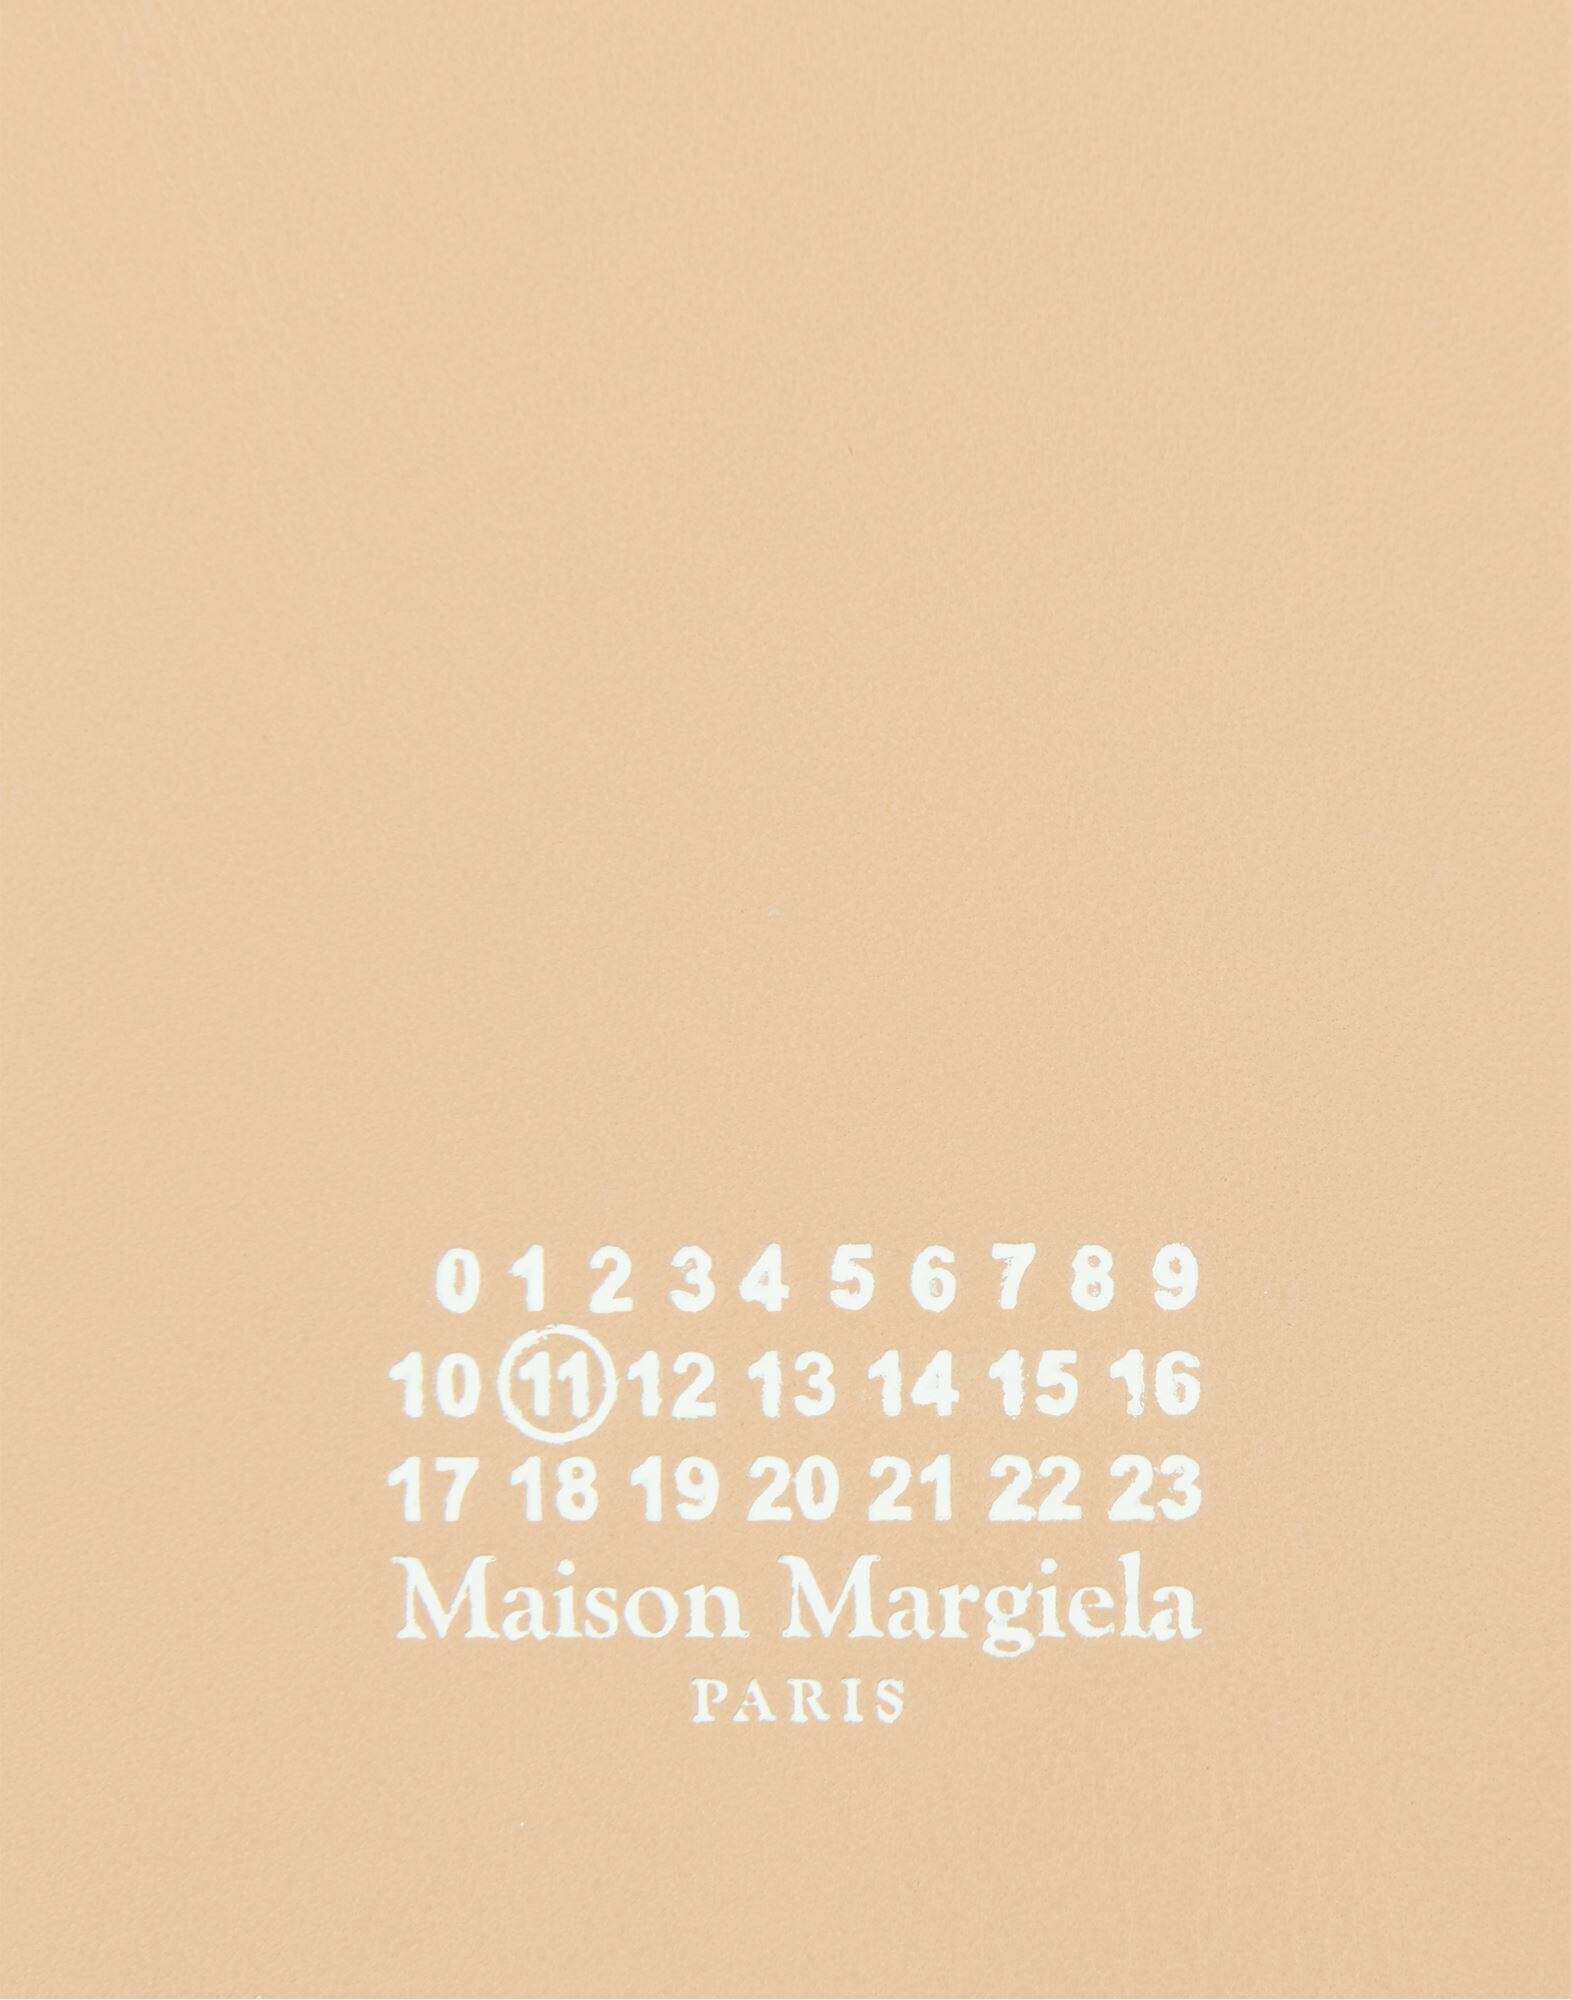 Maison Margiela: From 0 to 23, One of the iconic eponymous figures in contemporary fashion. 1580x2000 HD Wallpaper.